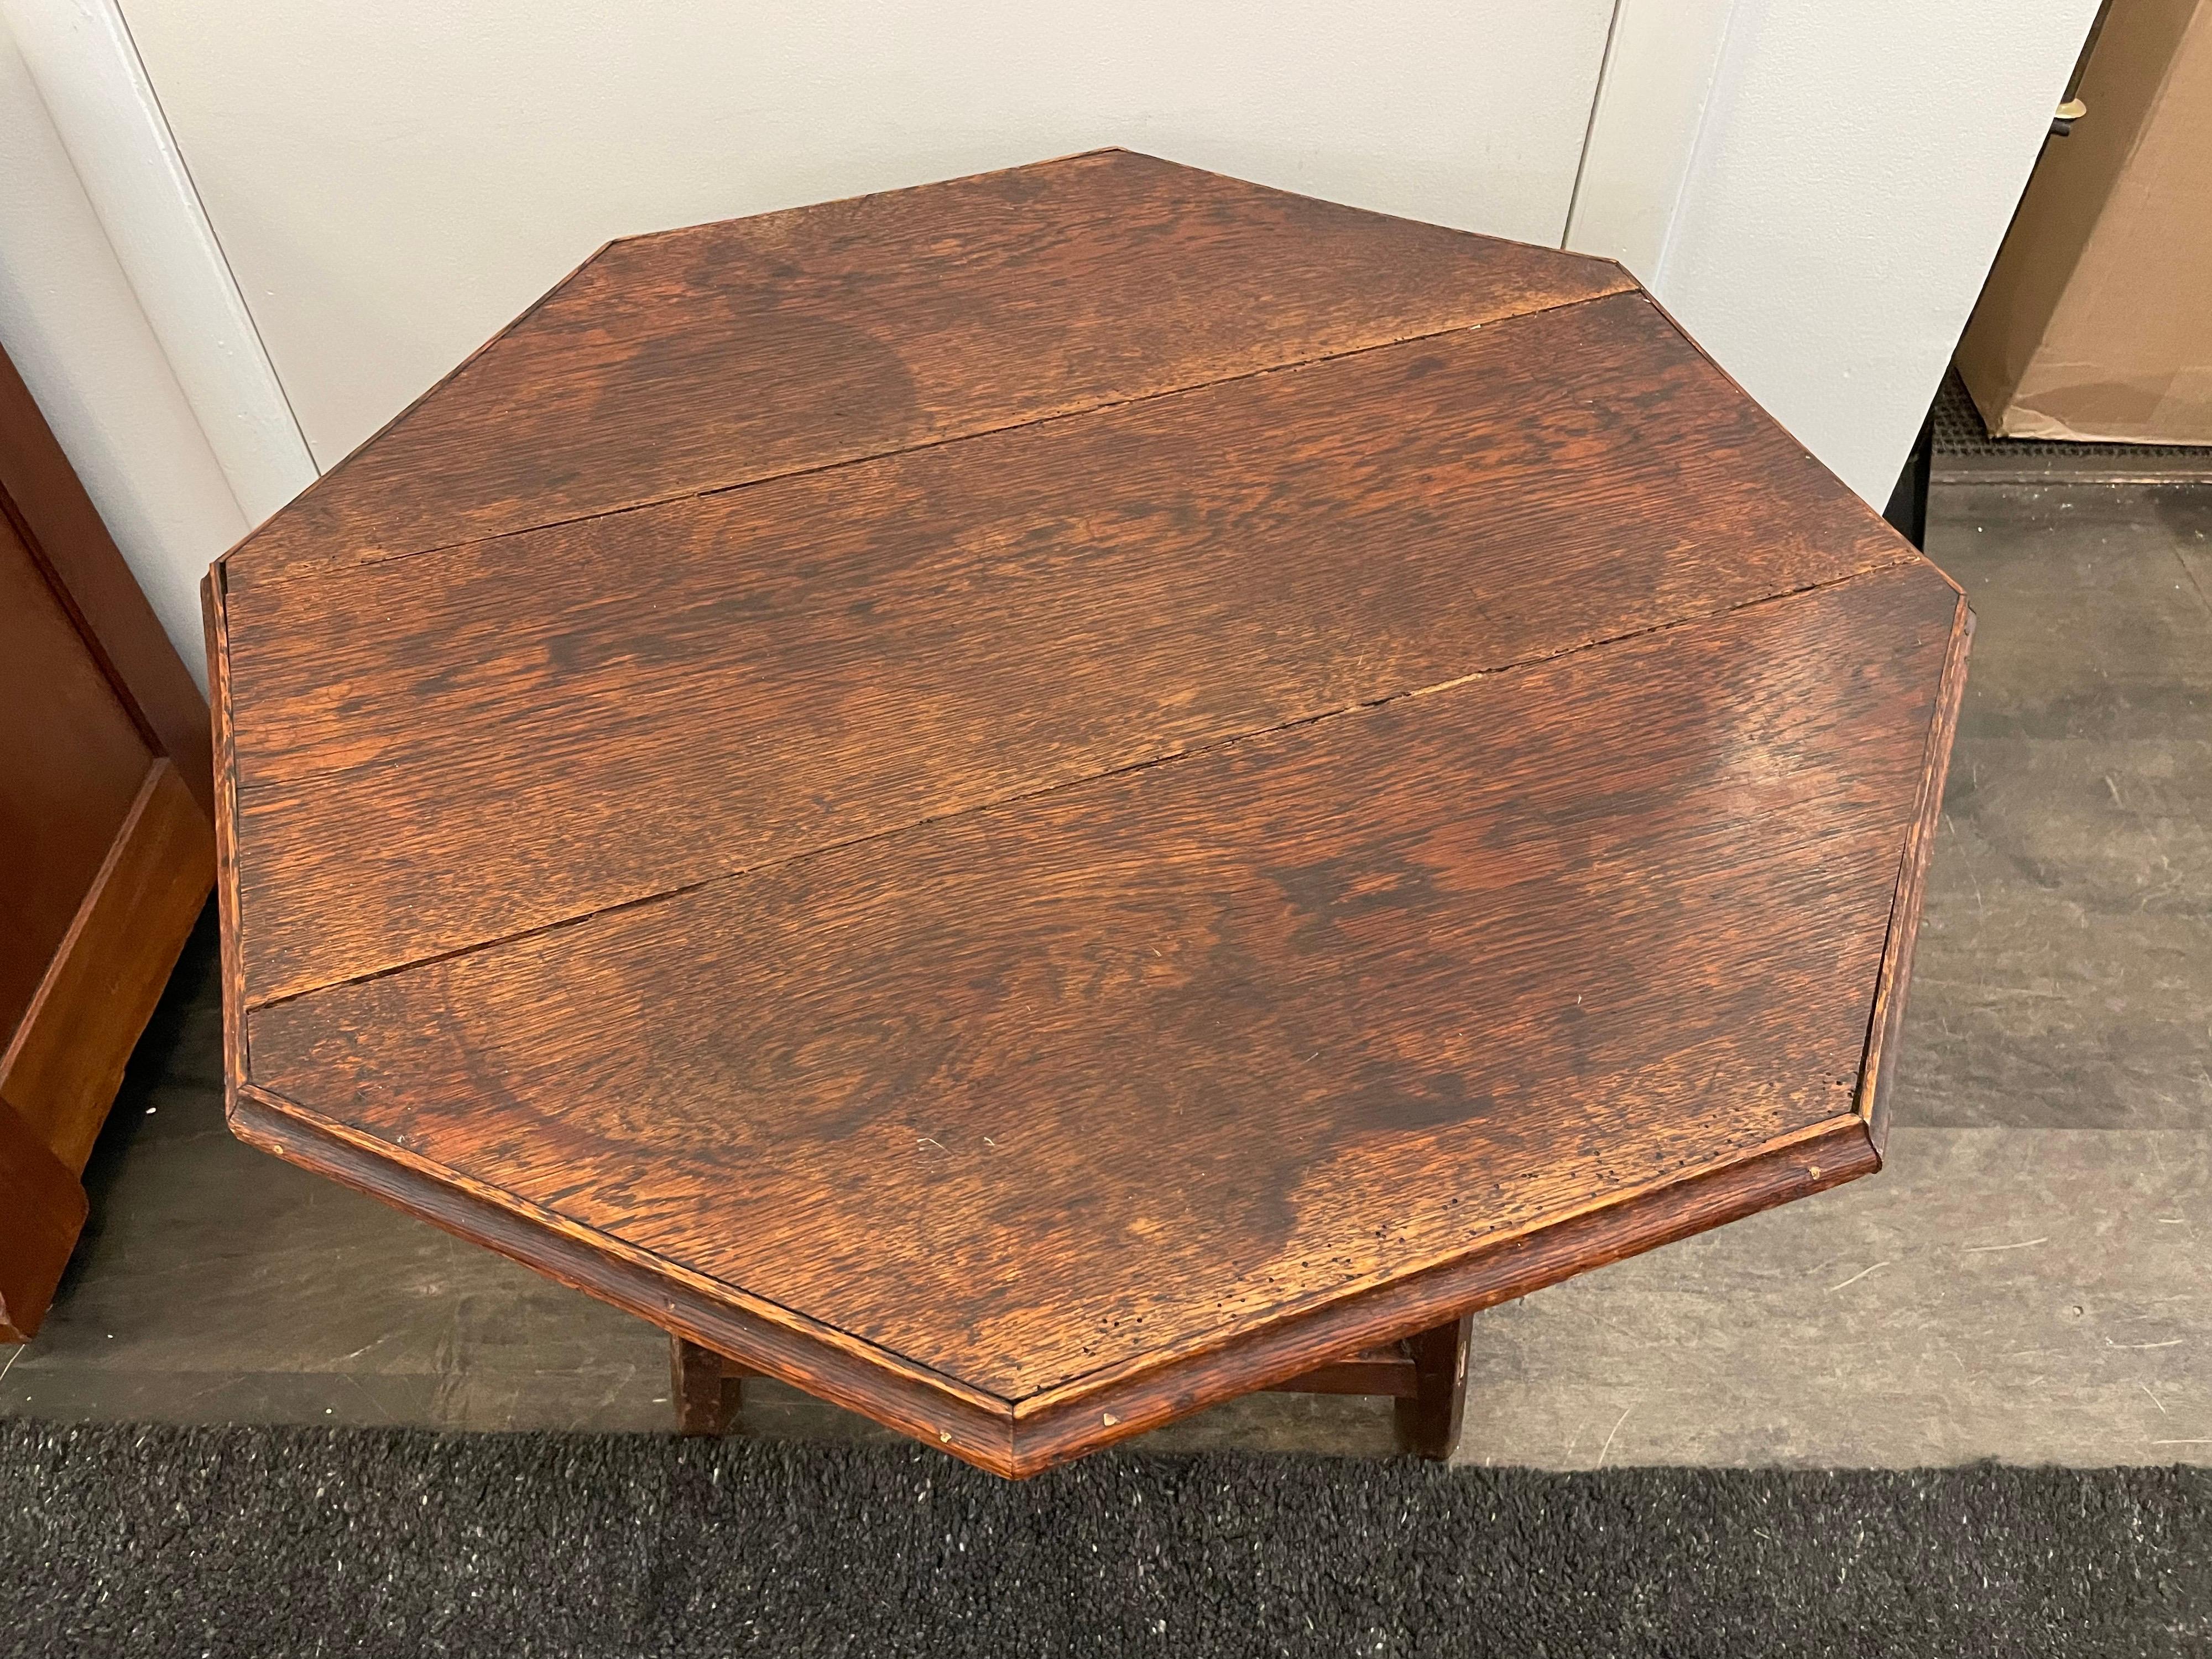 Hexagonal top detail to this wonderful aged oak occasional / side table. Wonderful coloring / patina from age and use. Triangular flared base.